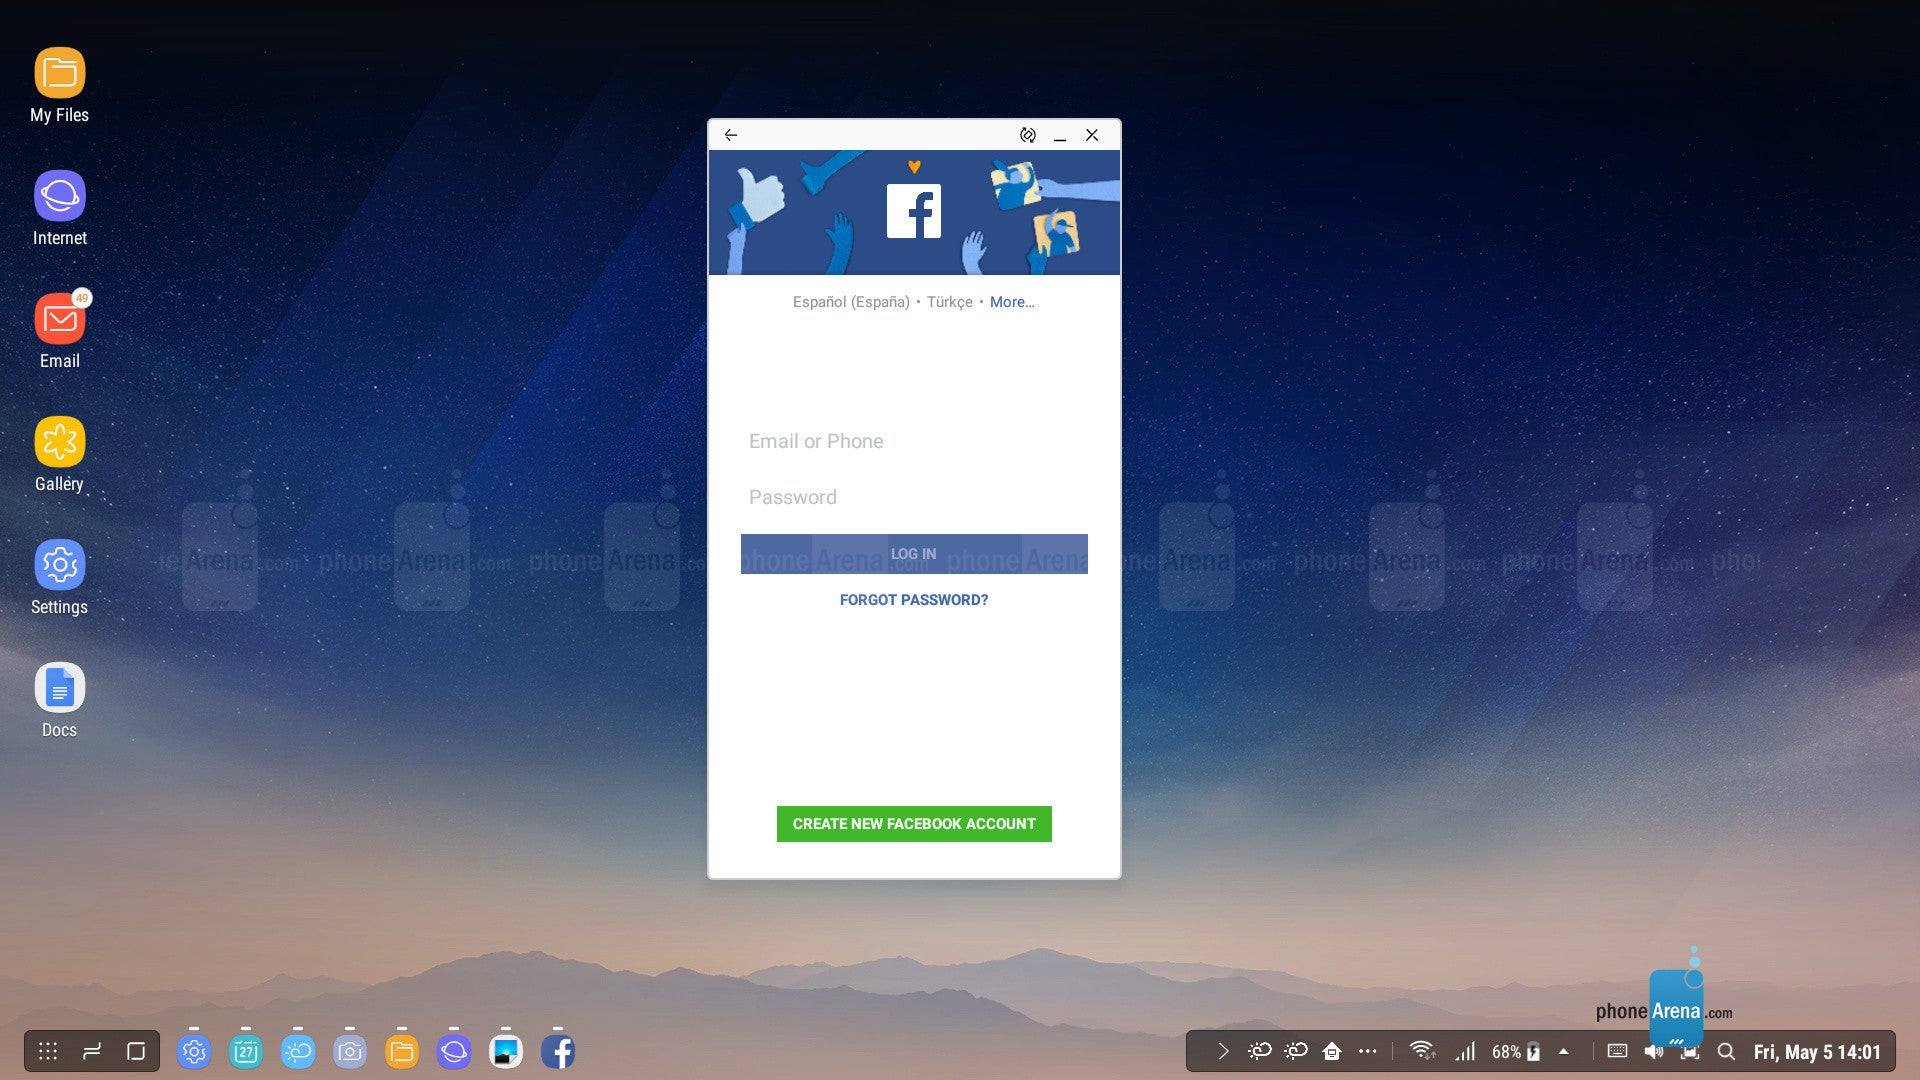 Facebook launches and works in a small, phone-size window - Samsung DeX review: the S8 won't replace your desktop PC